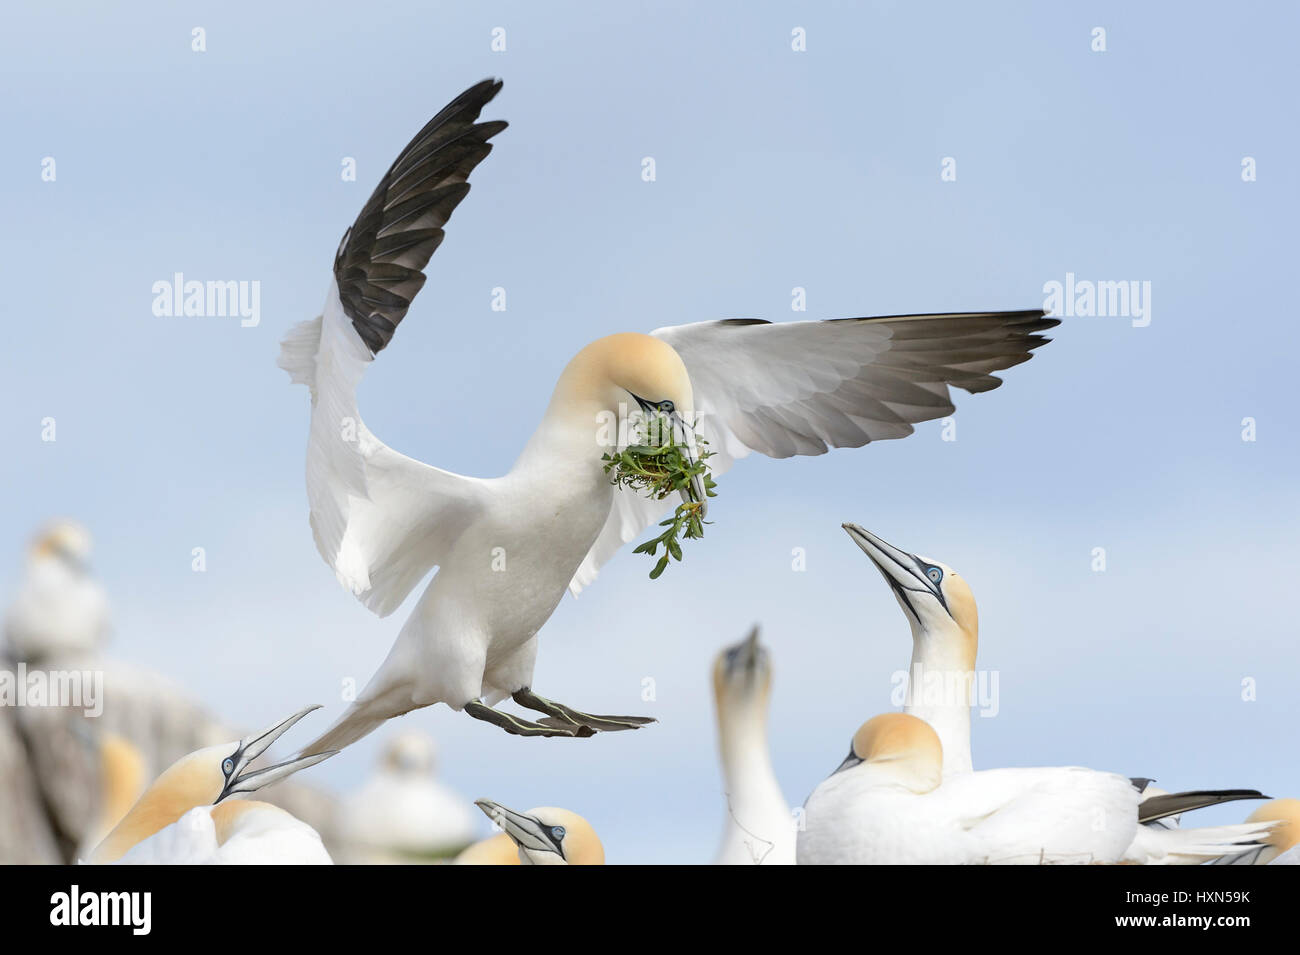 Northern gannet (Morus bassanus) adult in flight with nest material at breeding colony. Great Saltee island, co Wexford, Ireland. April. Stock Photo